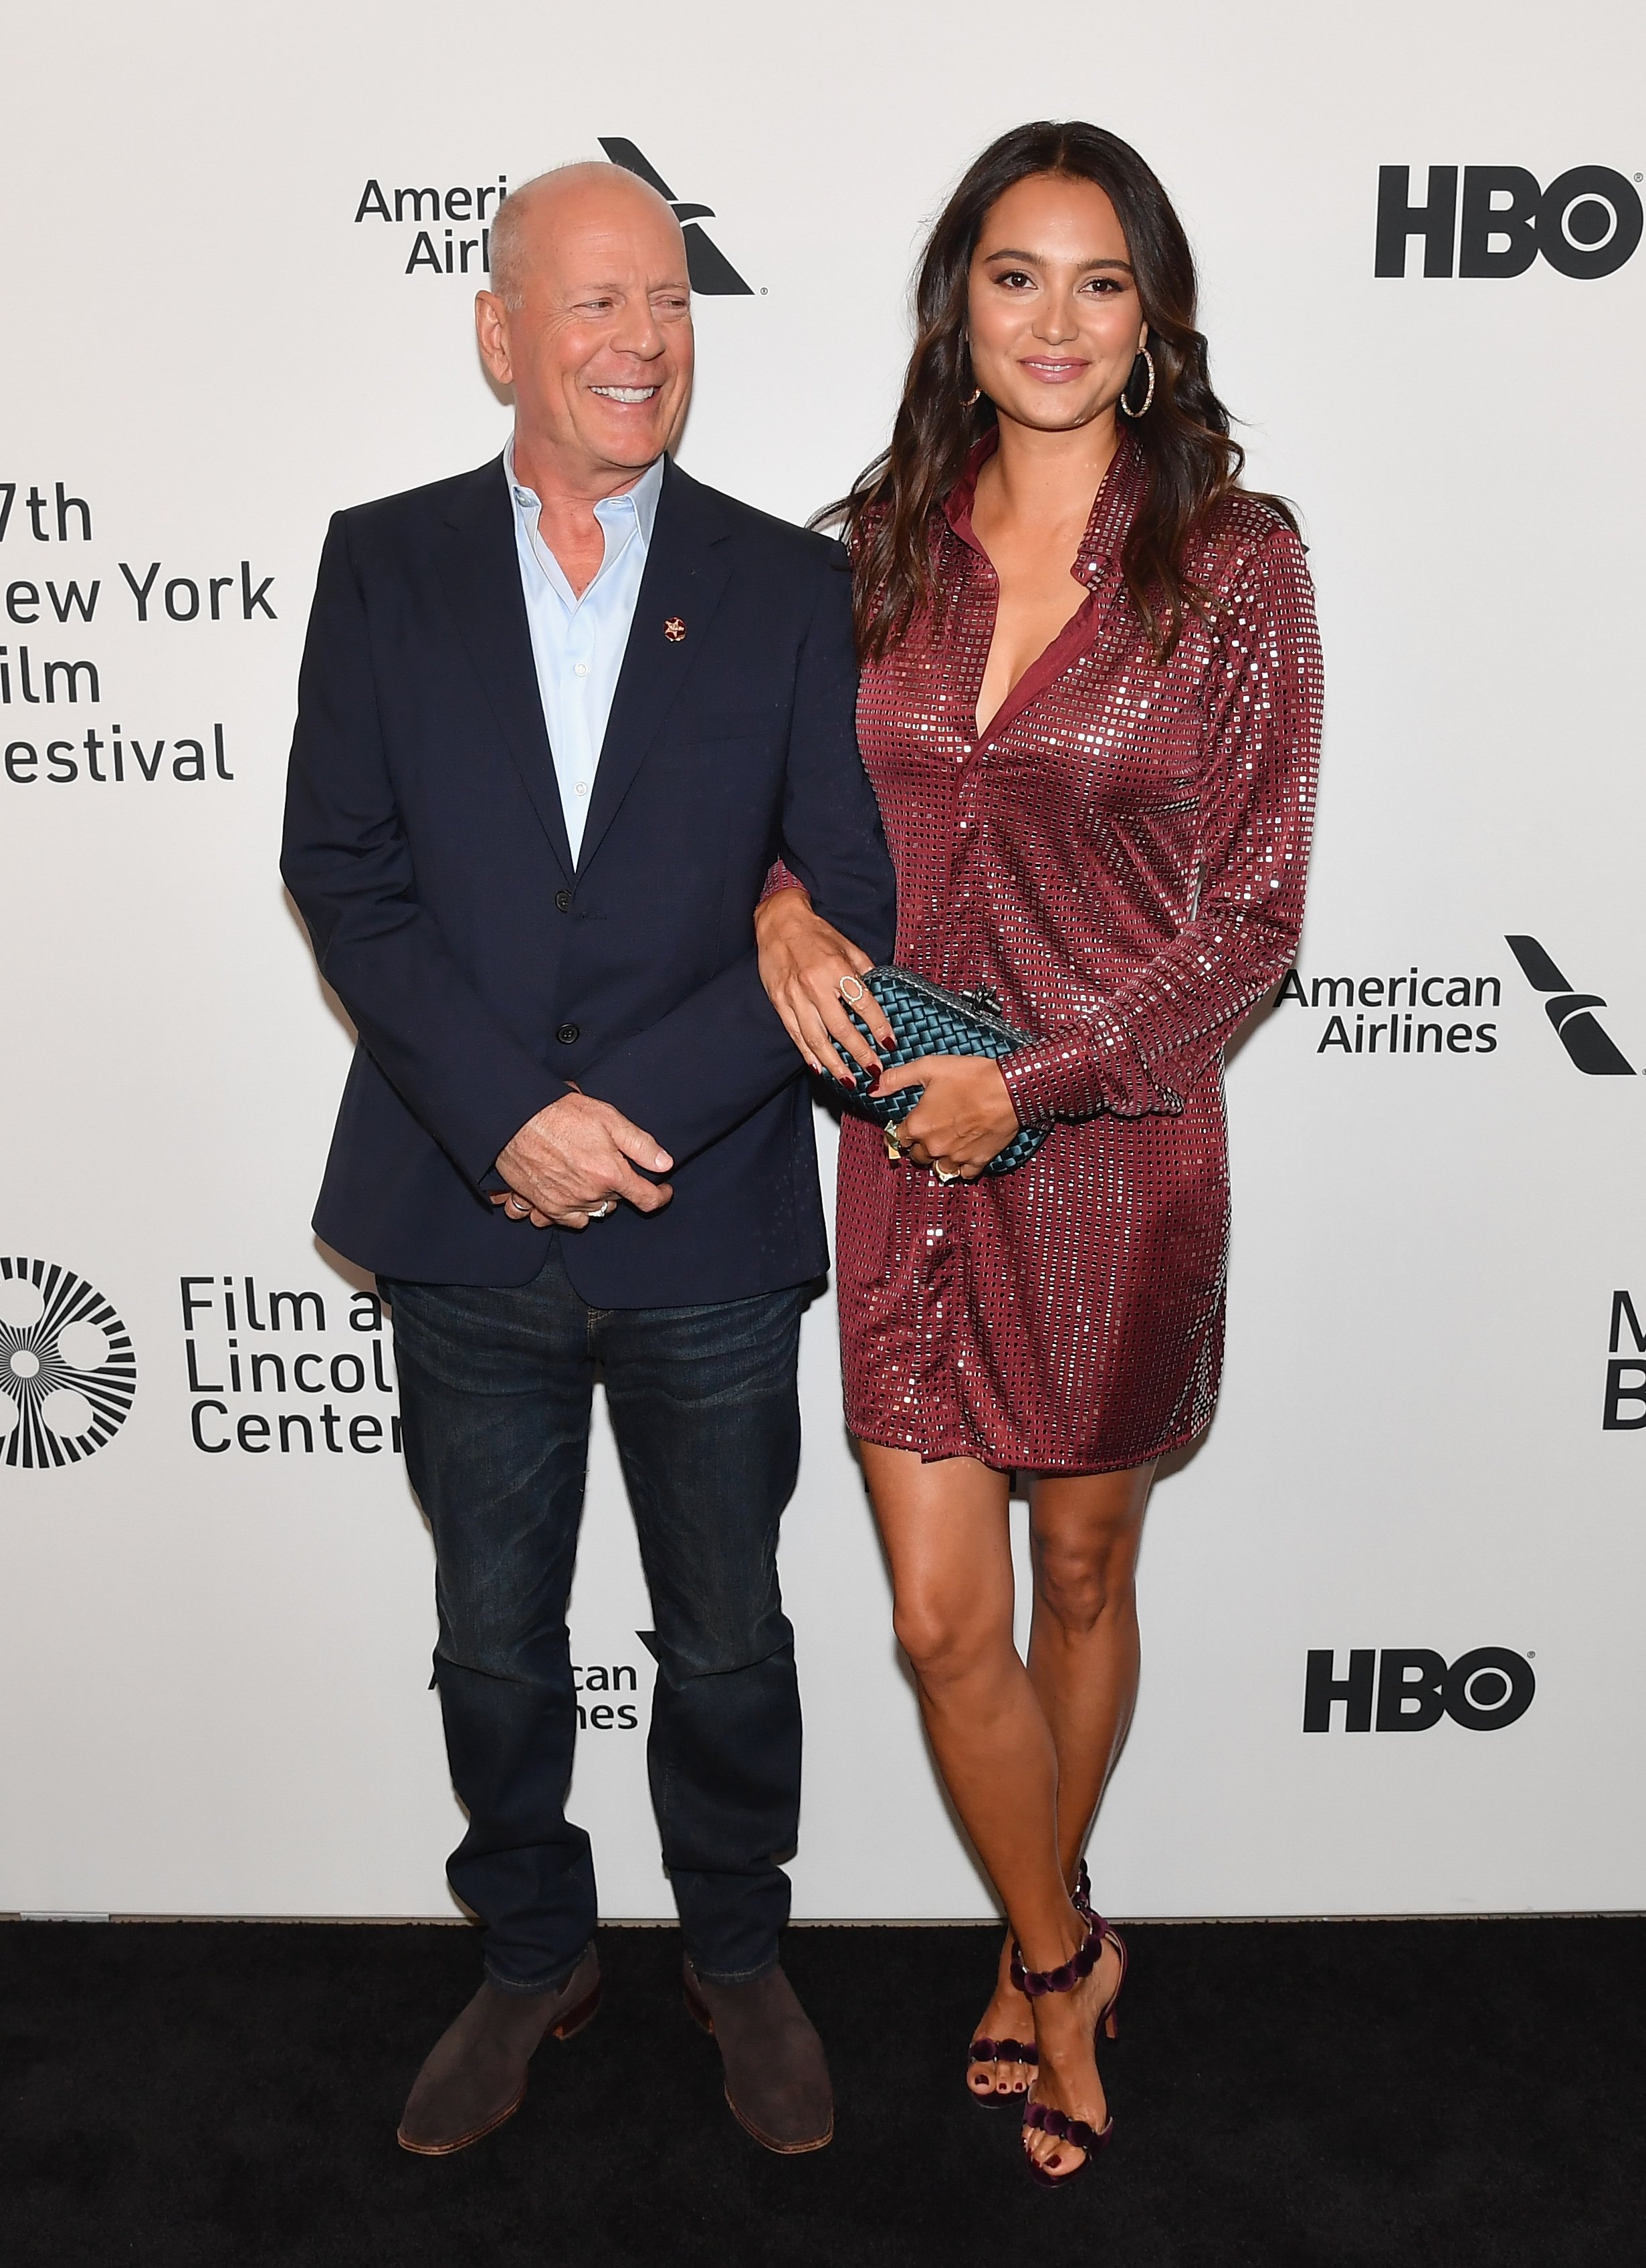 Bruce Willis and wife Emma Heming Willis pose arm in arm at premiere of Motherless Brooklyn' in 2019